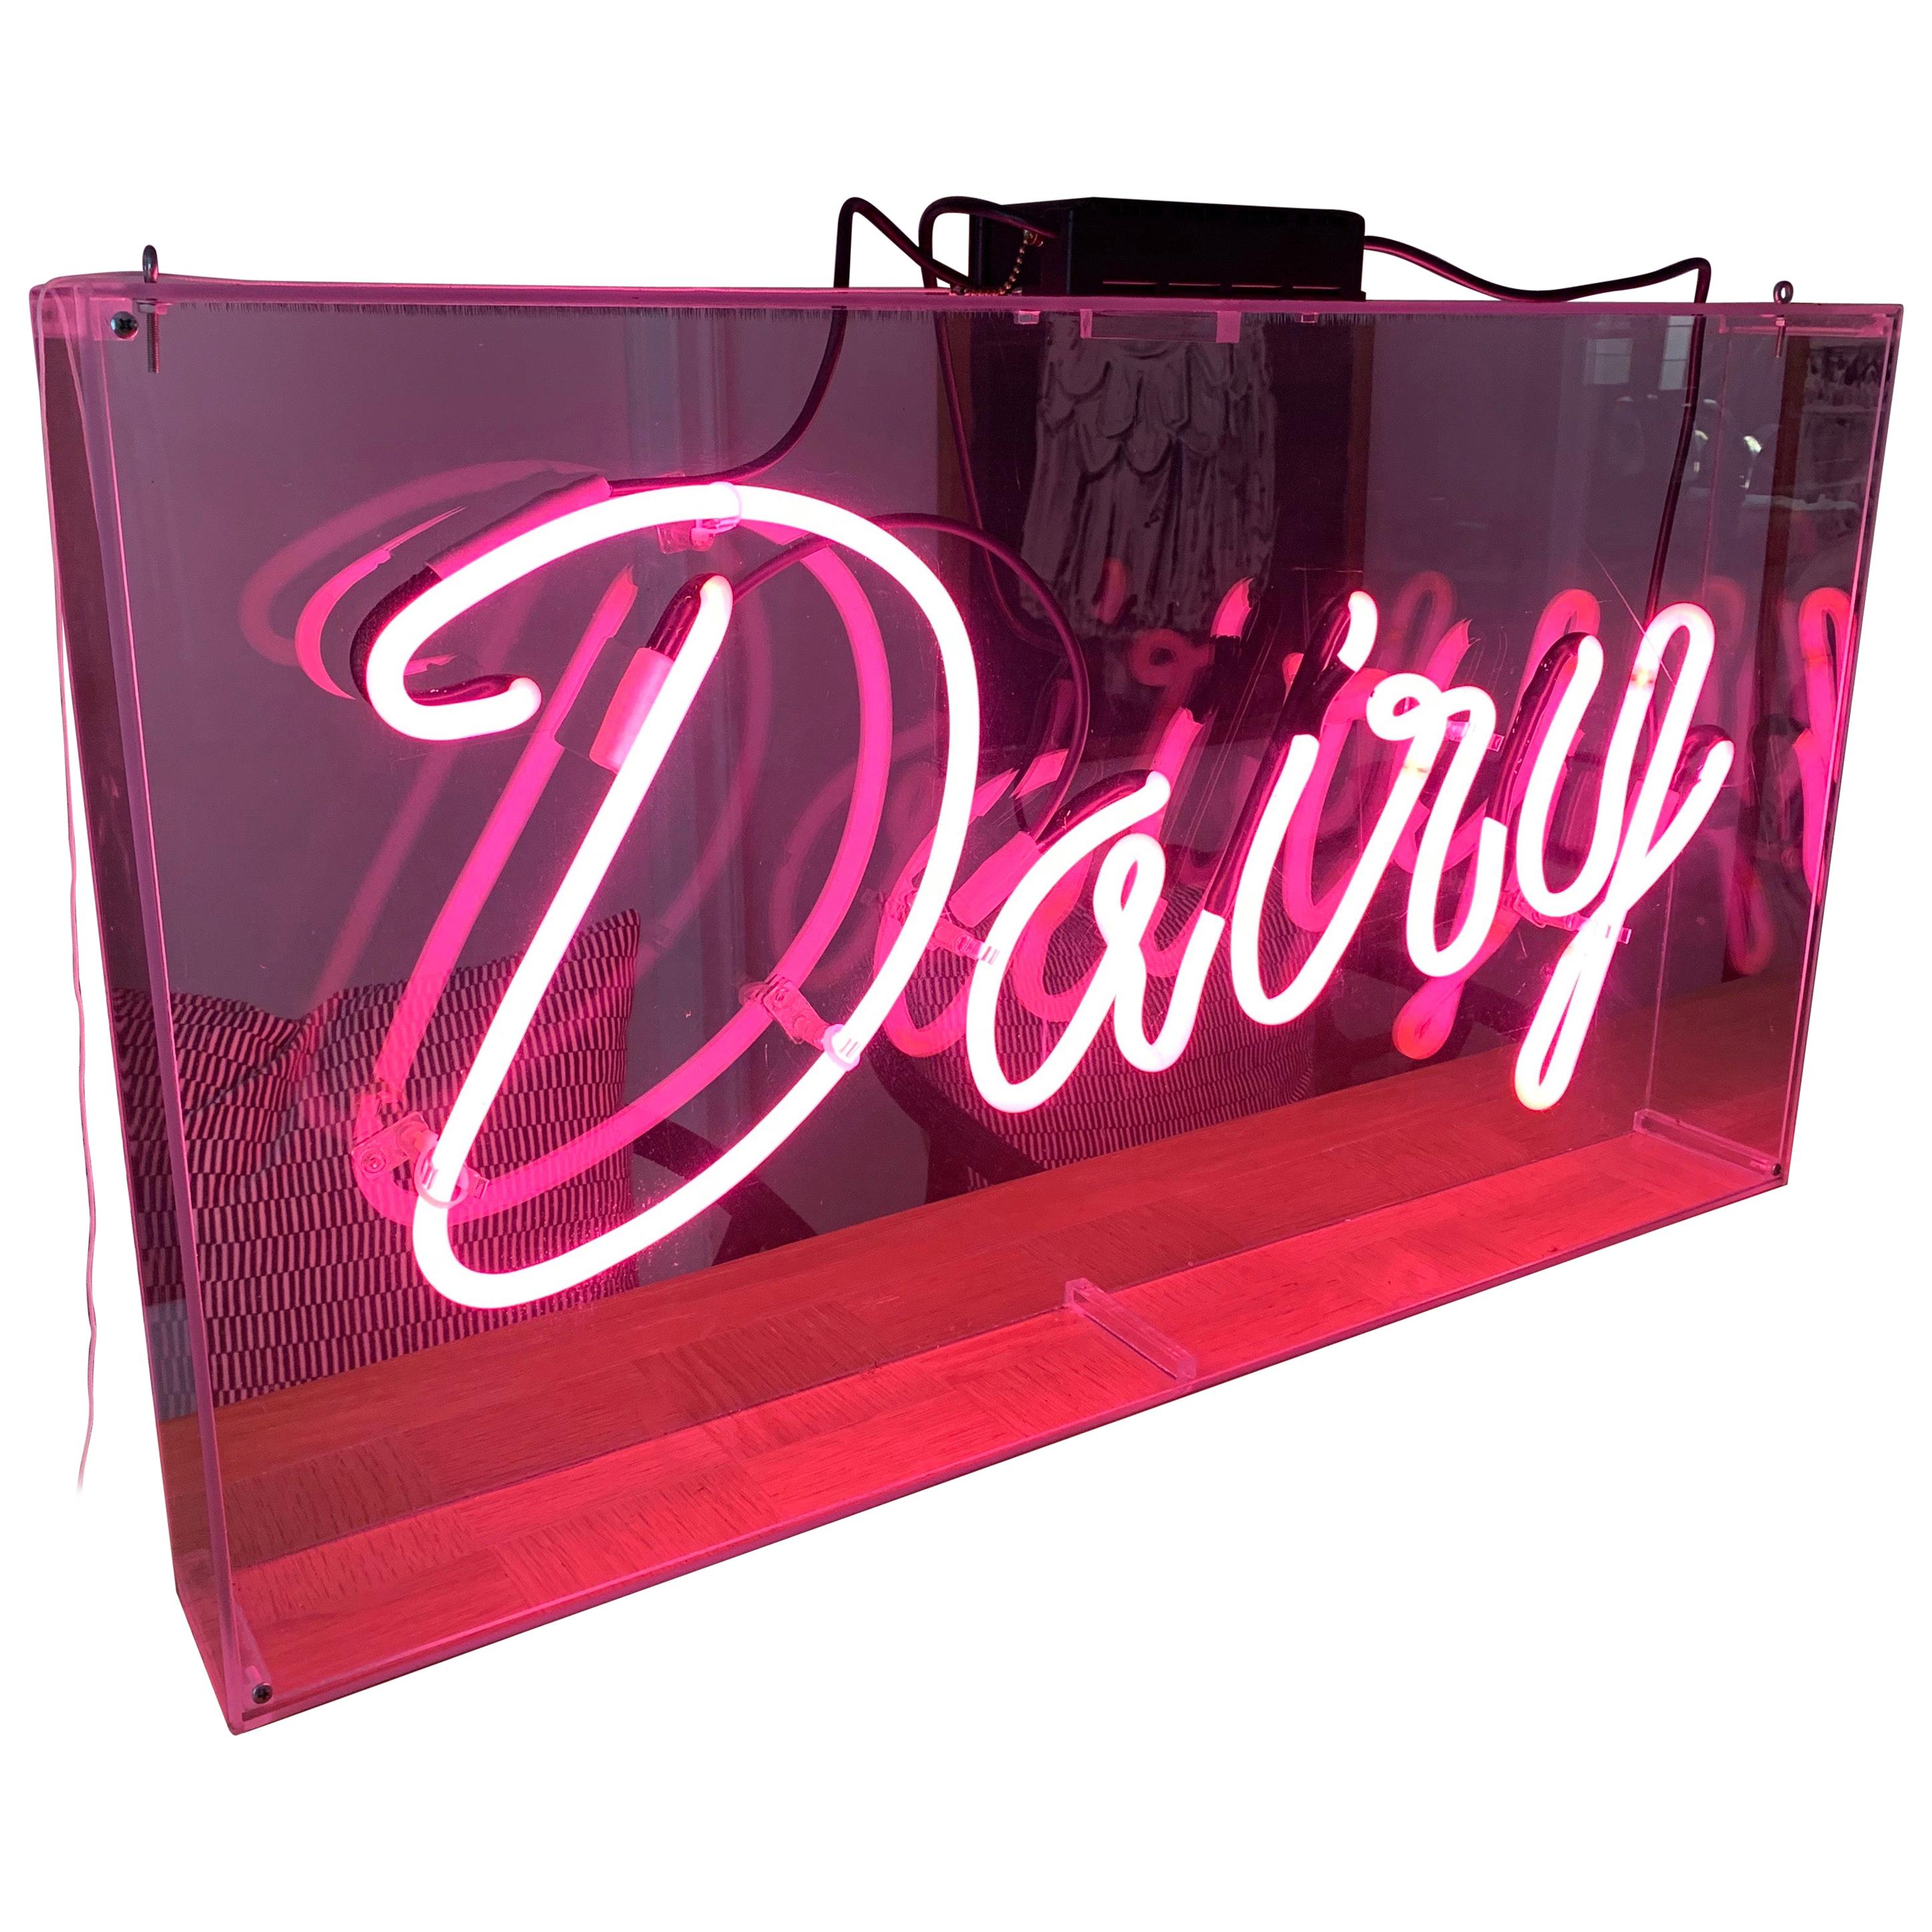 Vintage Pink Neon Dairy Sign in Hanging Lucite Box